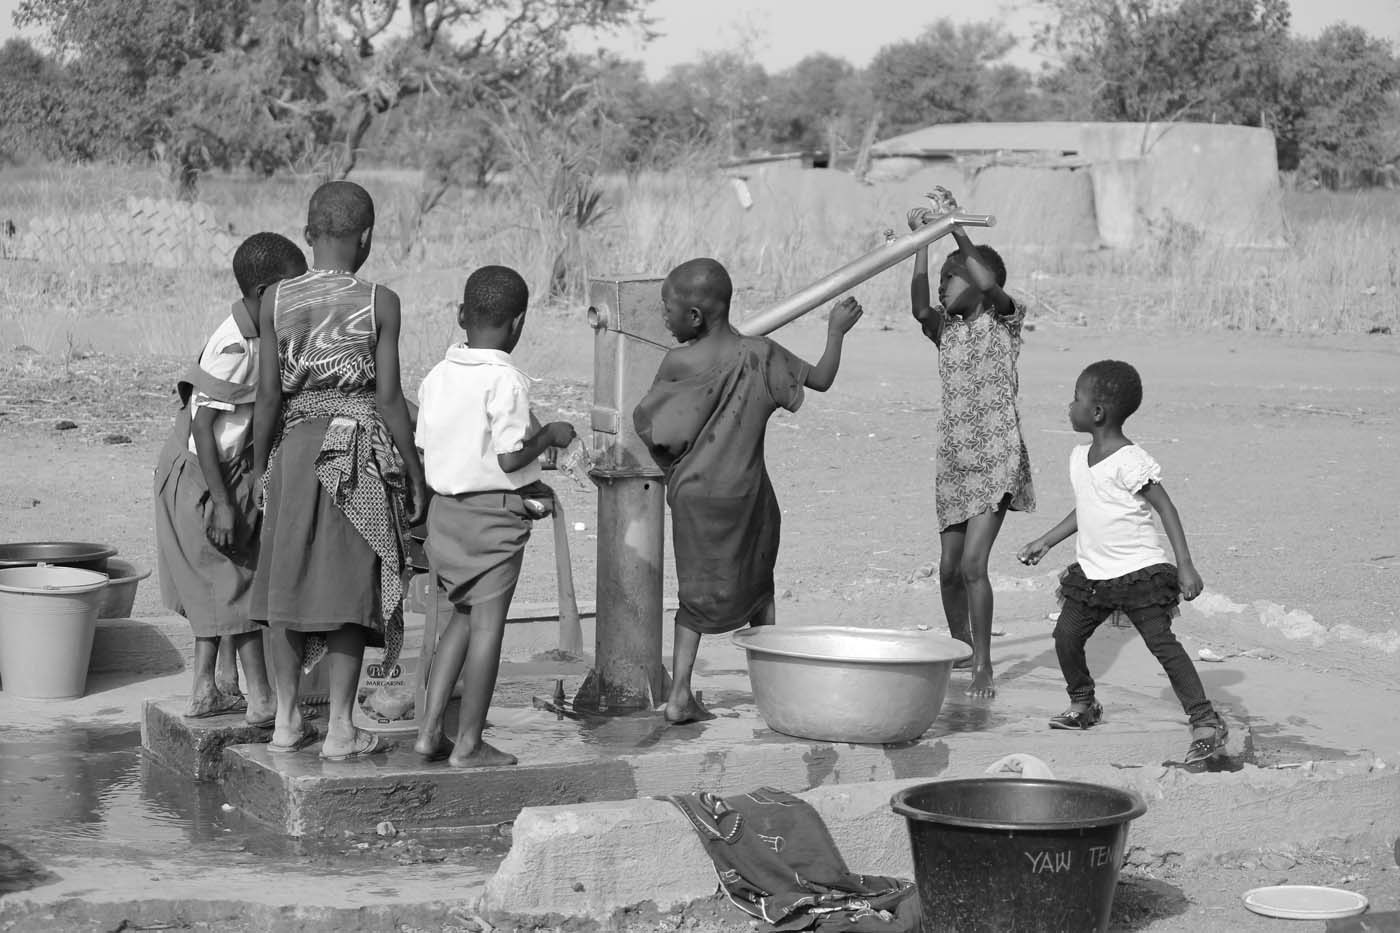 Children fetch water from a young age